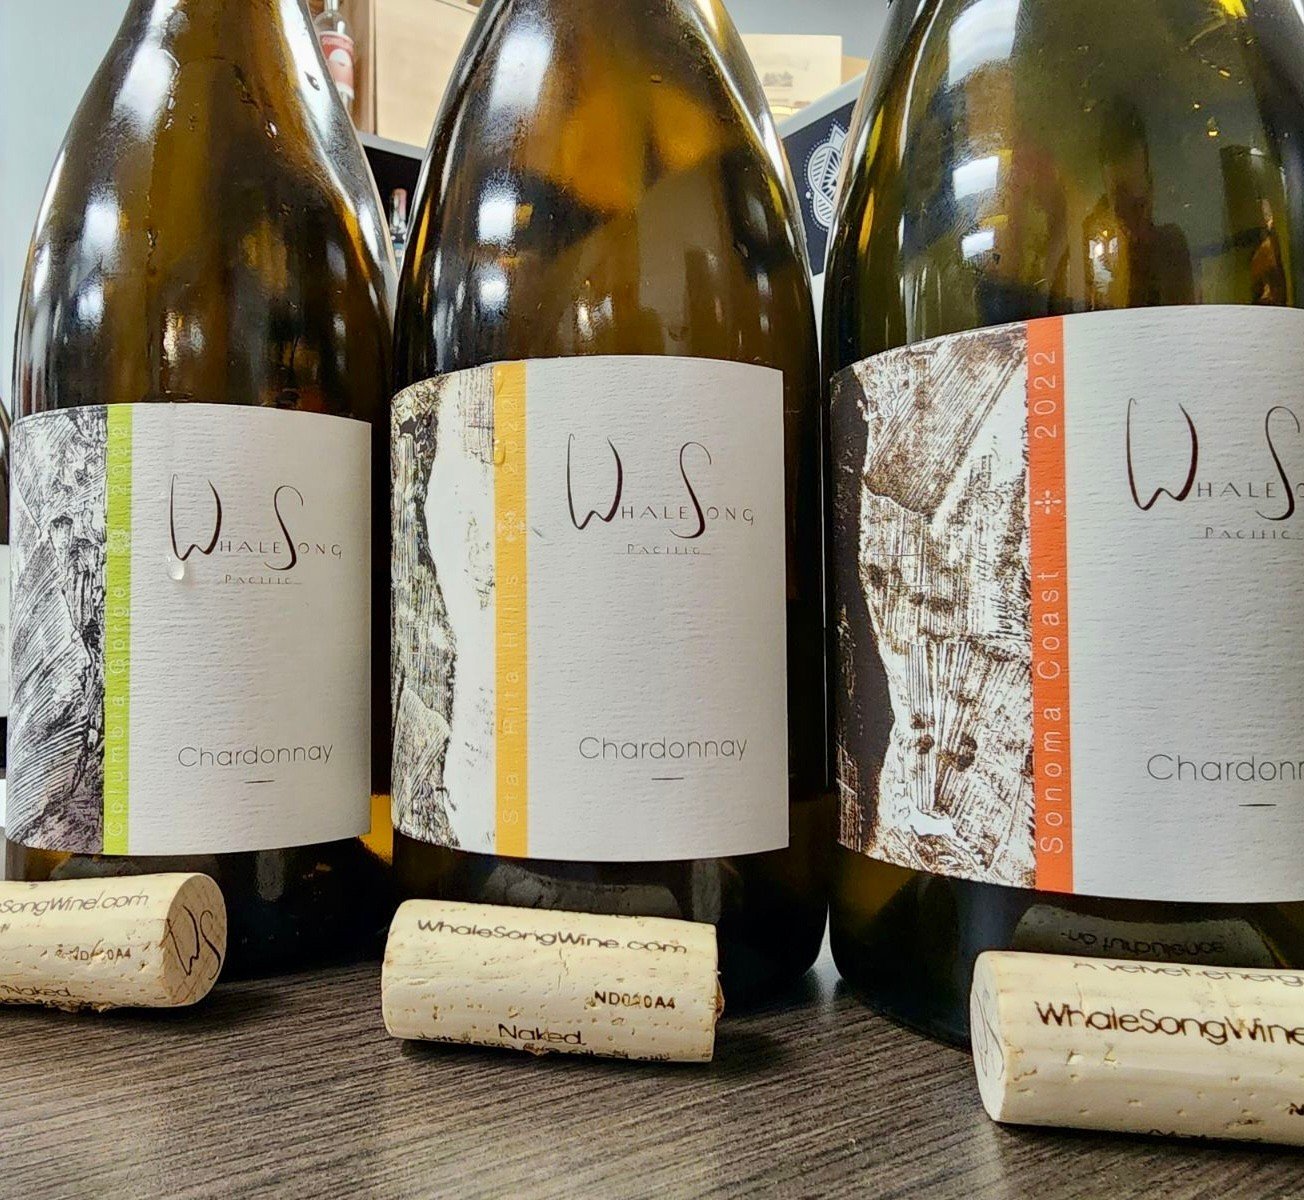 This is your queue to 1000% ask your rep about Matthias Pippigs newest project, Whalesong, that we tasted at our last meeting. High elevation Chardonnay from a 1,000 mile stretch of Pacific coastline: Santa Rita Hills, Sonoma Coast and Columbia Gorge